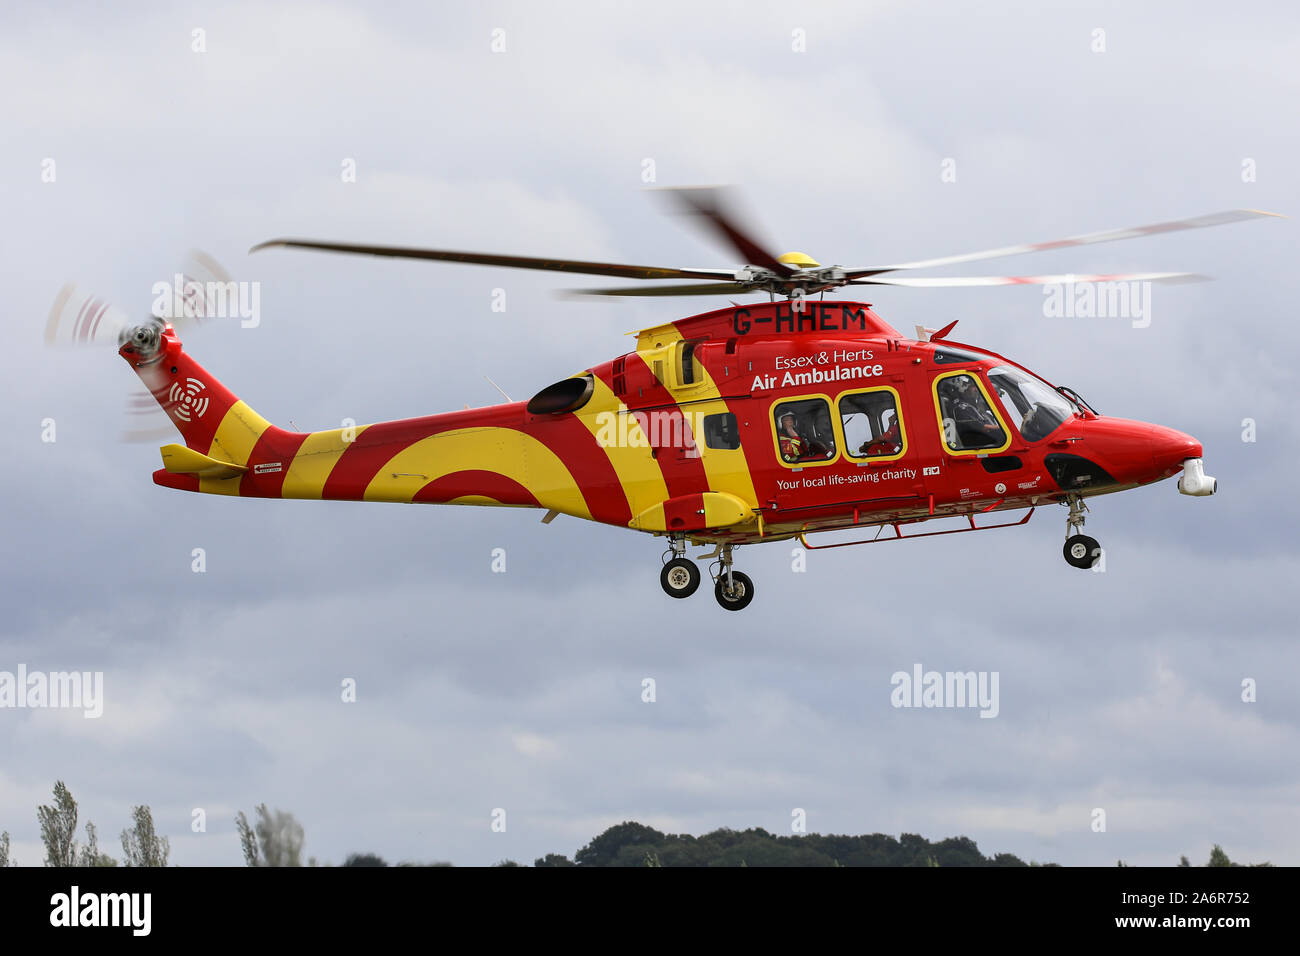 An AgustaWestland AW169 belonging to Essex & Herts Air Ambulance lands at North Weald Airfield Stock Photo